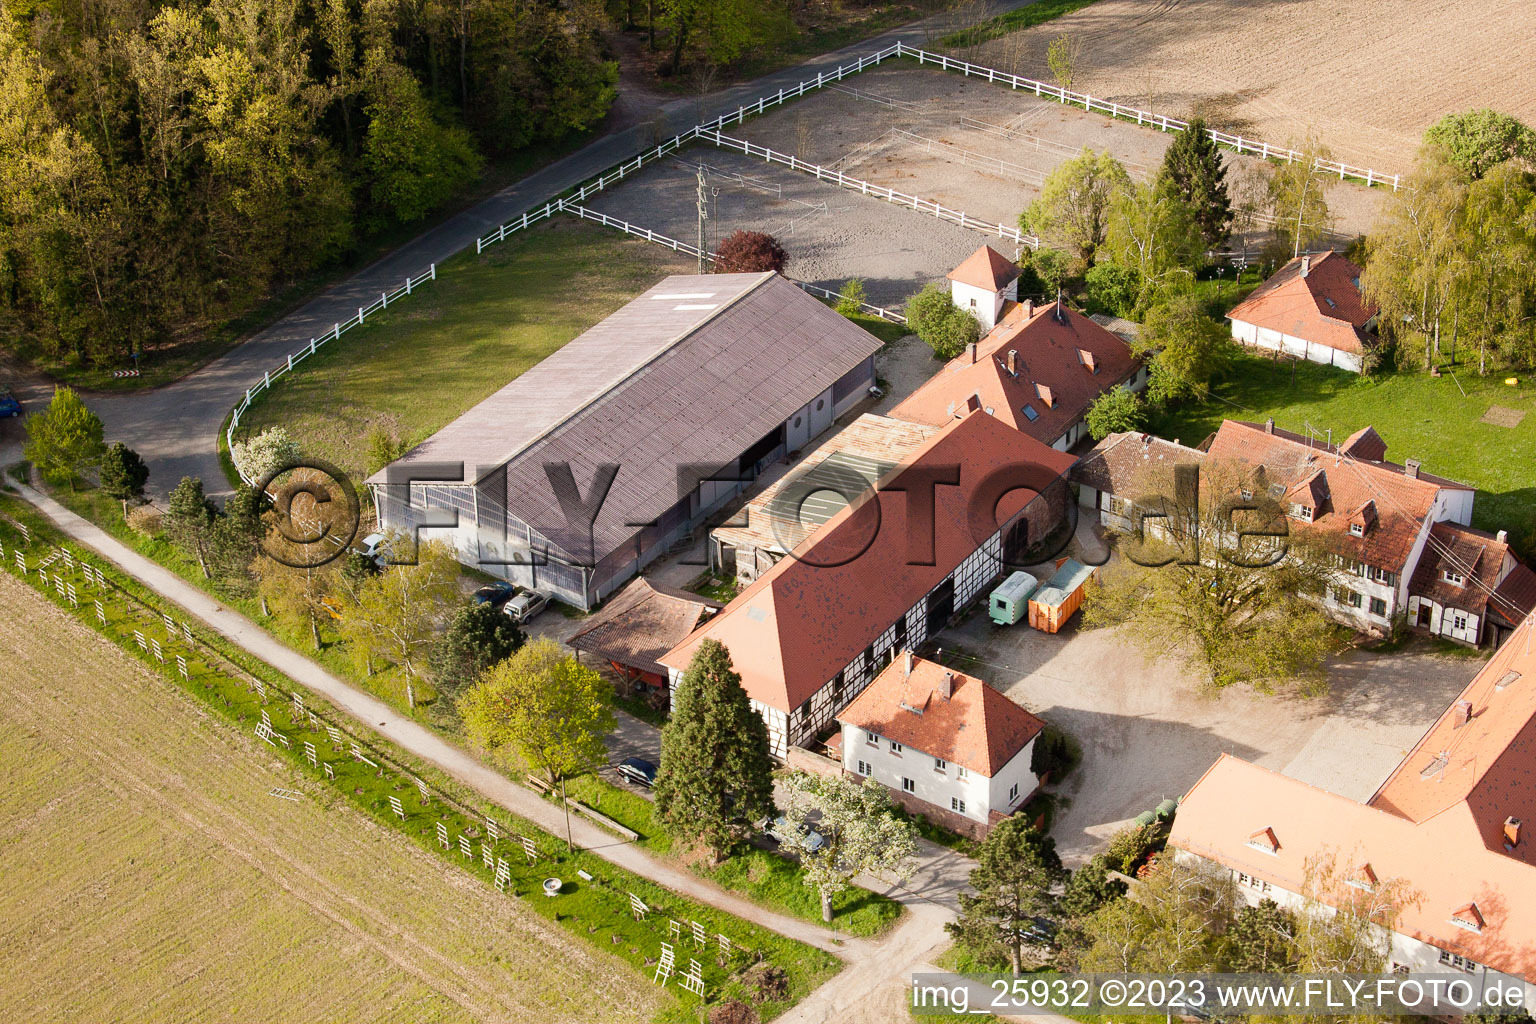 Bird's eye view of Rittnerthof in the district Durlach in Karlsruhe in the state Baden-Wuerttemberg, Germany